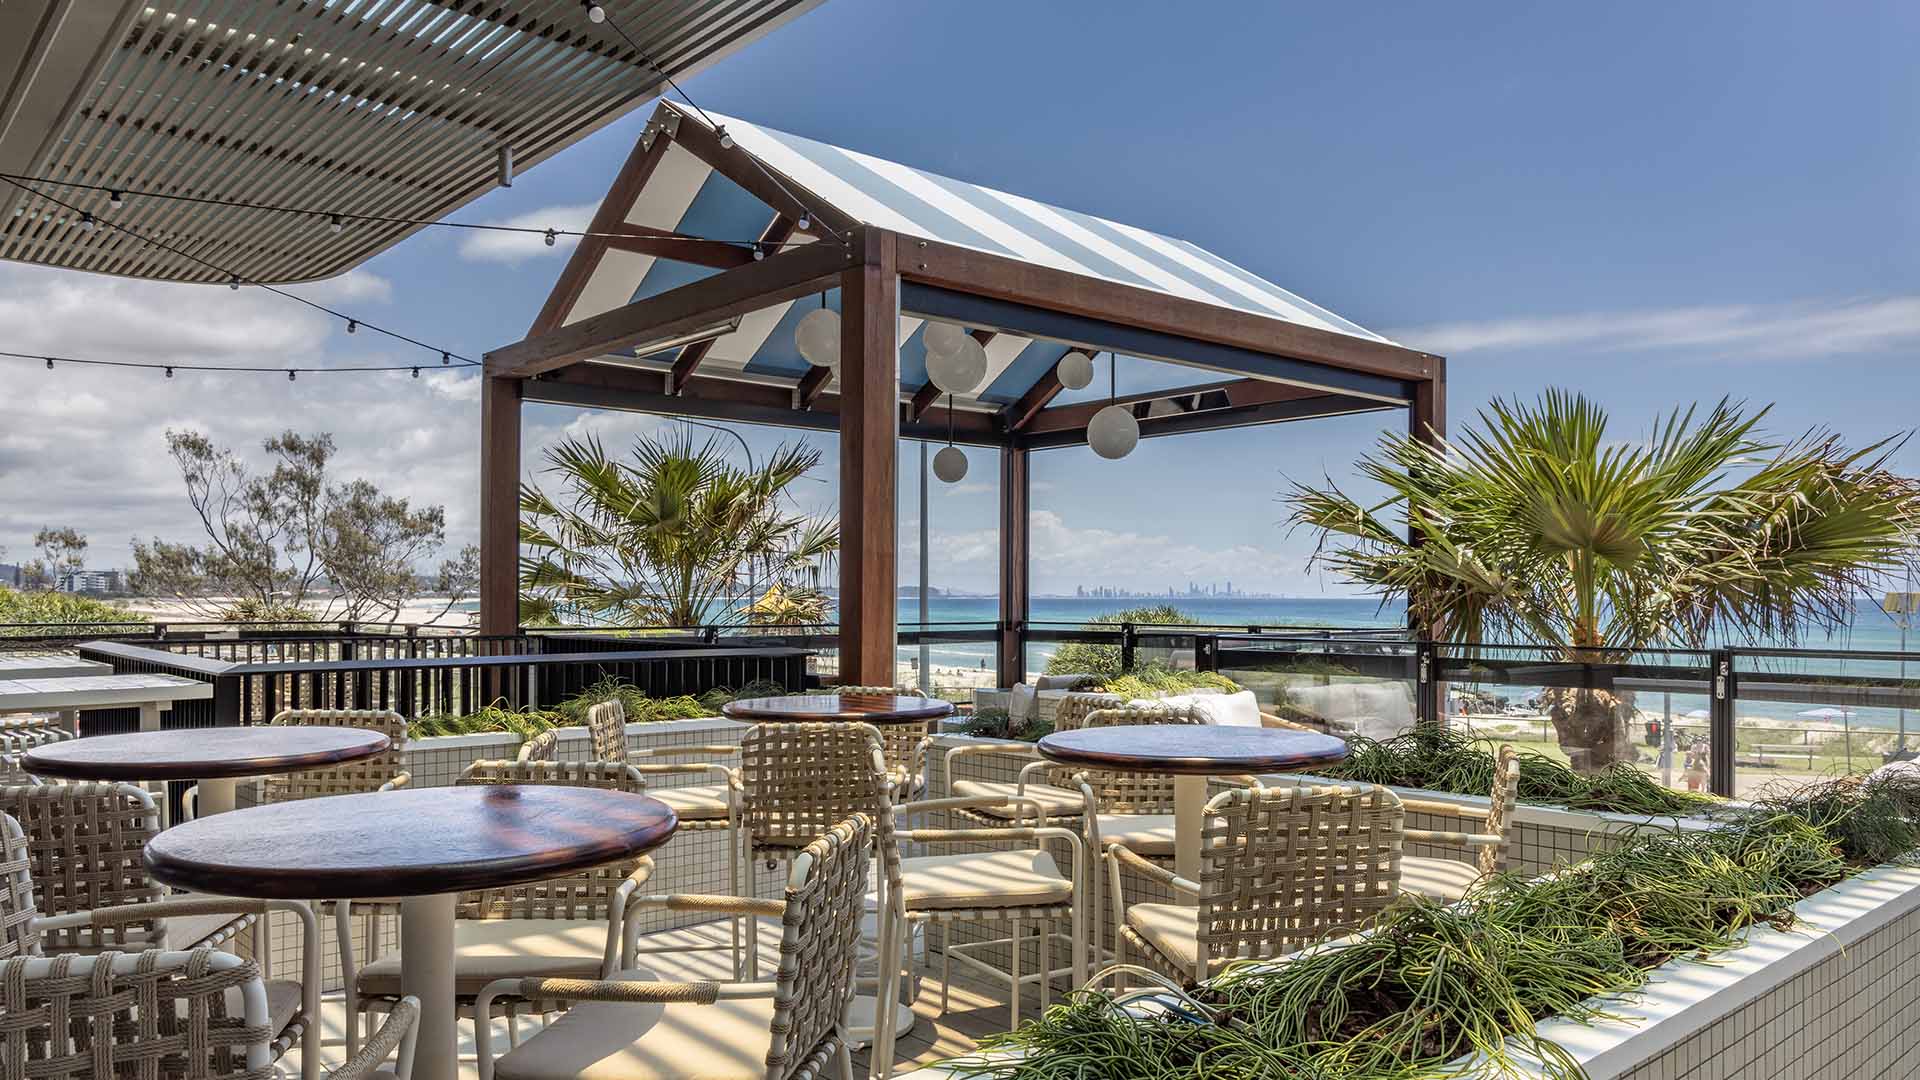 Now Open: Kirra Beach House Is the Gold Coast's New Oceanfront Drinking and Dining Spot with Cabanas